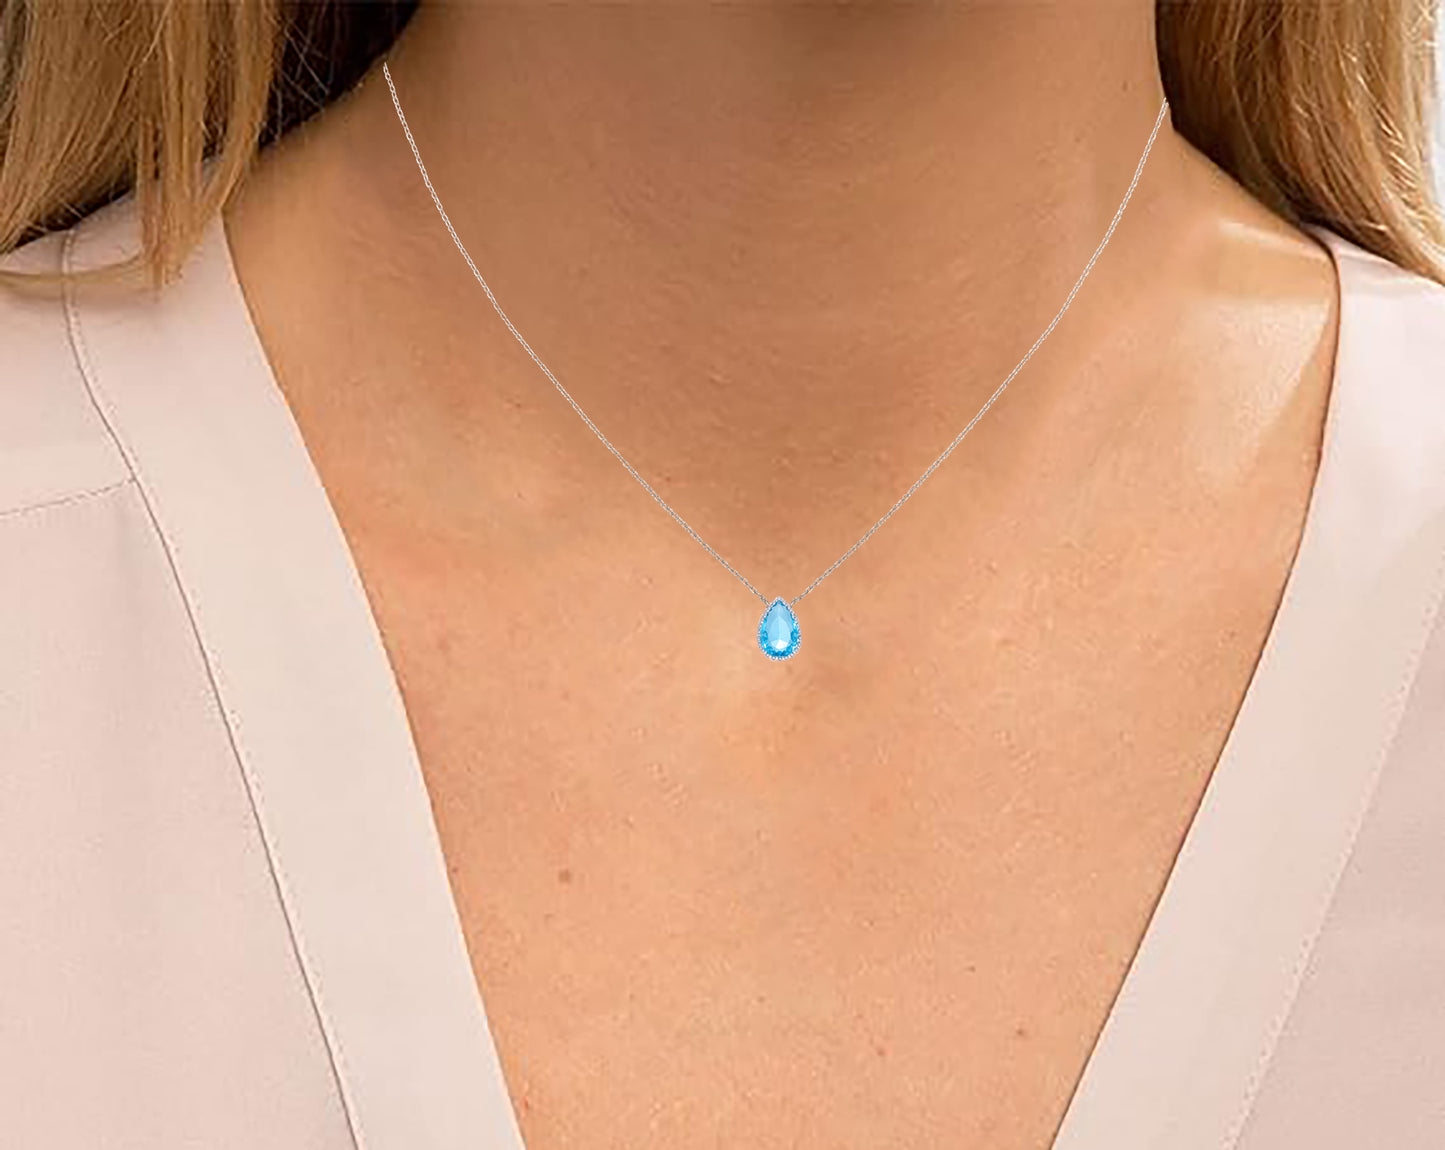 March Birthstone Pendant Necklace